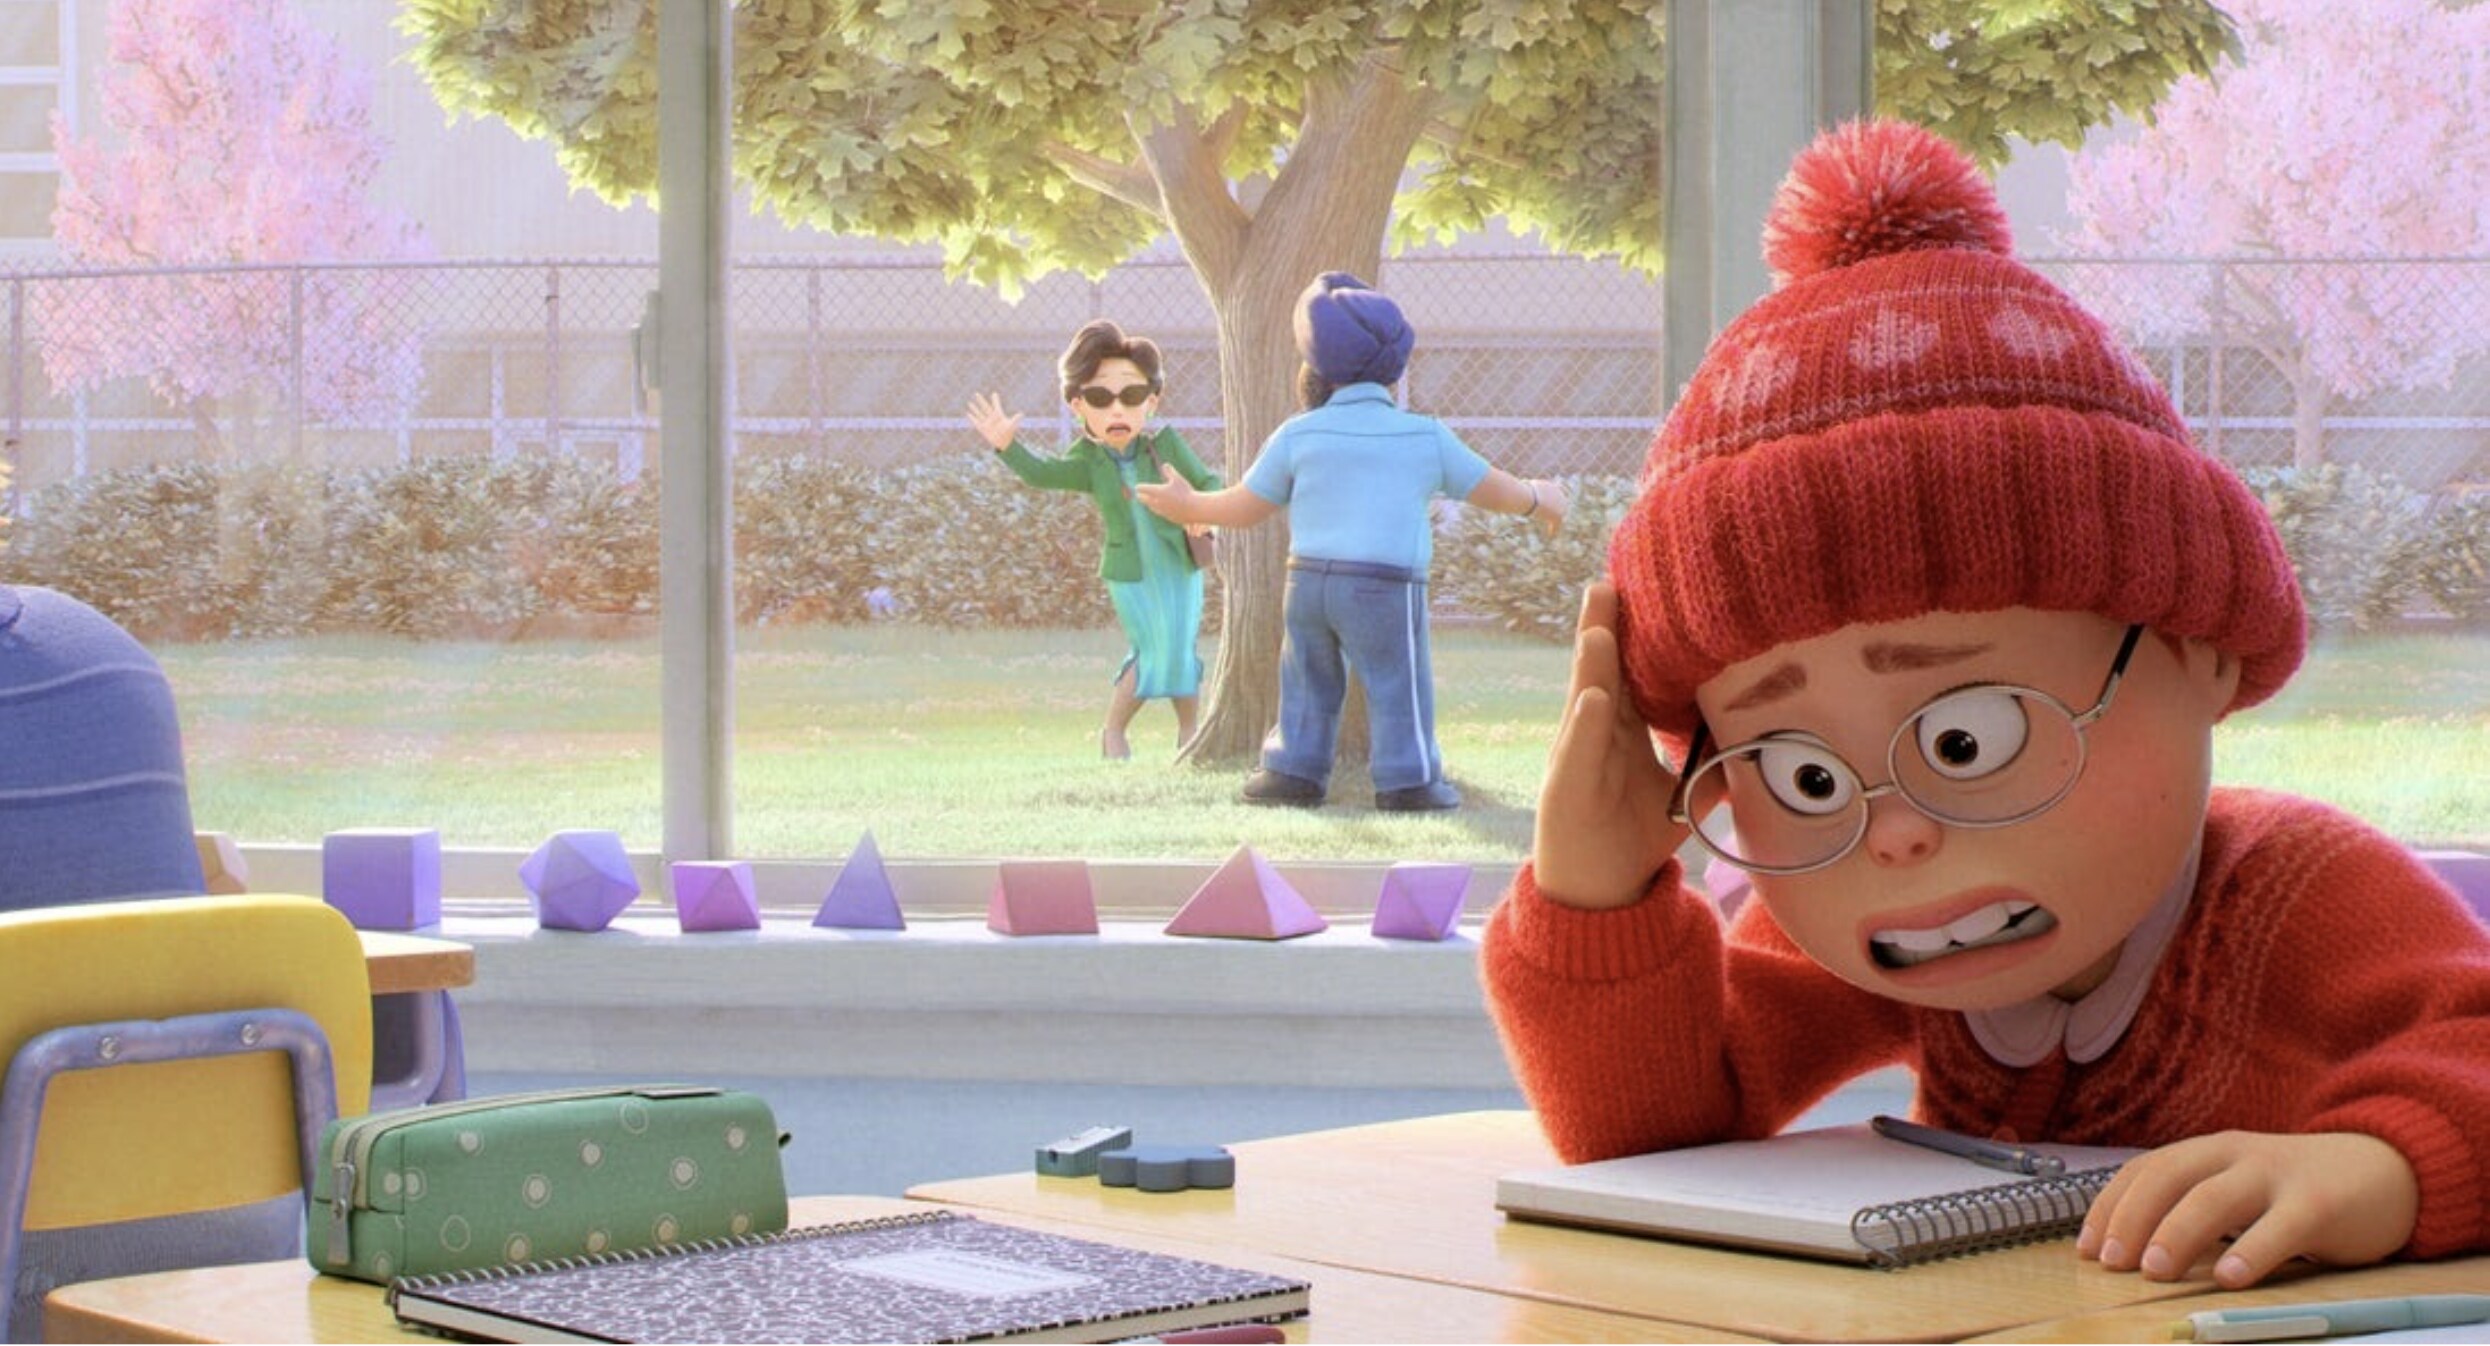 Mei hides in embarrassment as her mom is caught spying on her in school in Disney and Pixar's Turning Red